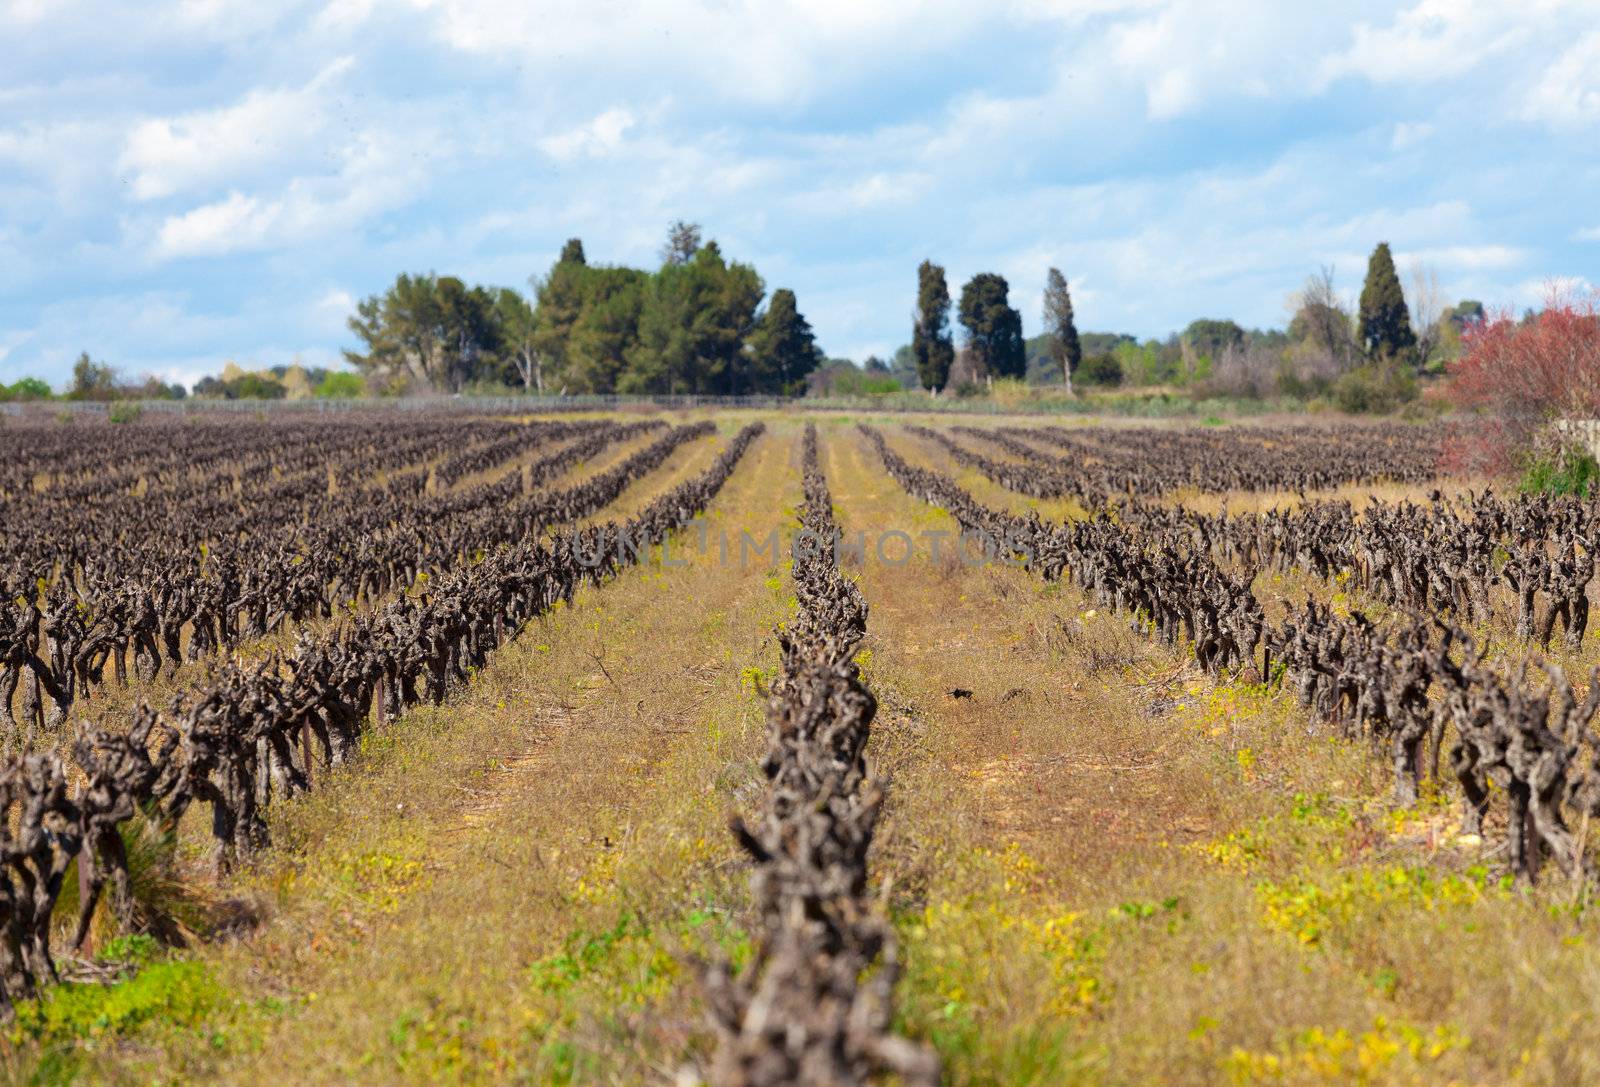 Photograph of a dry vinyard with beautiful surroundings